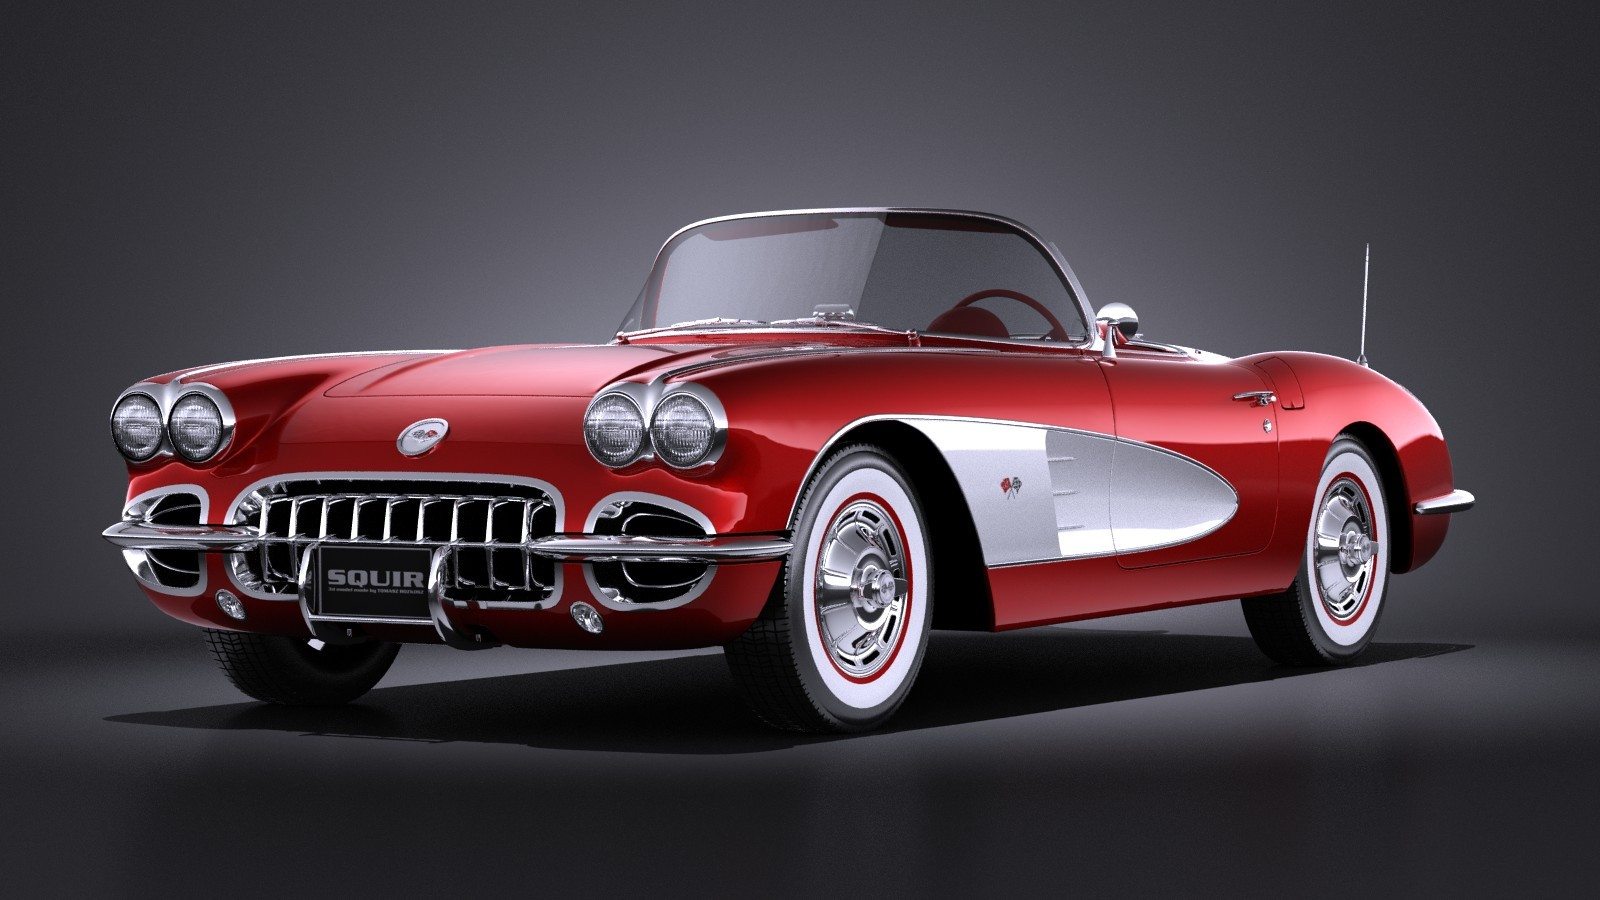 The Iconic 1958 Chevy Corvette: A Timeless American Classic